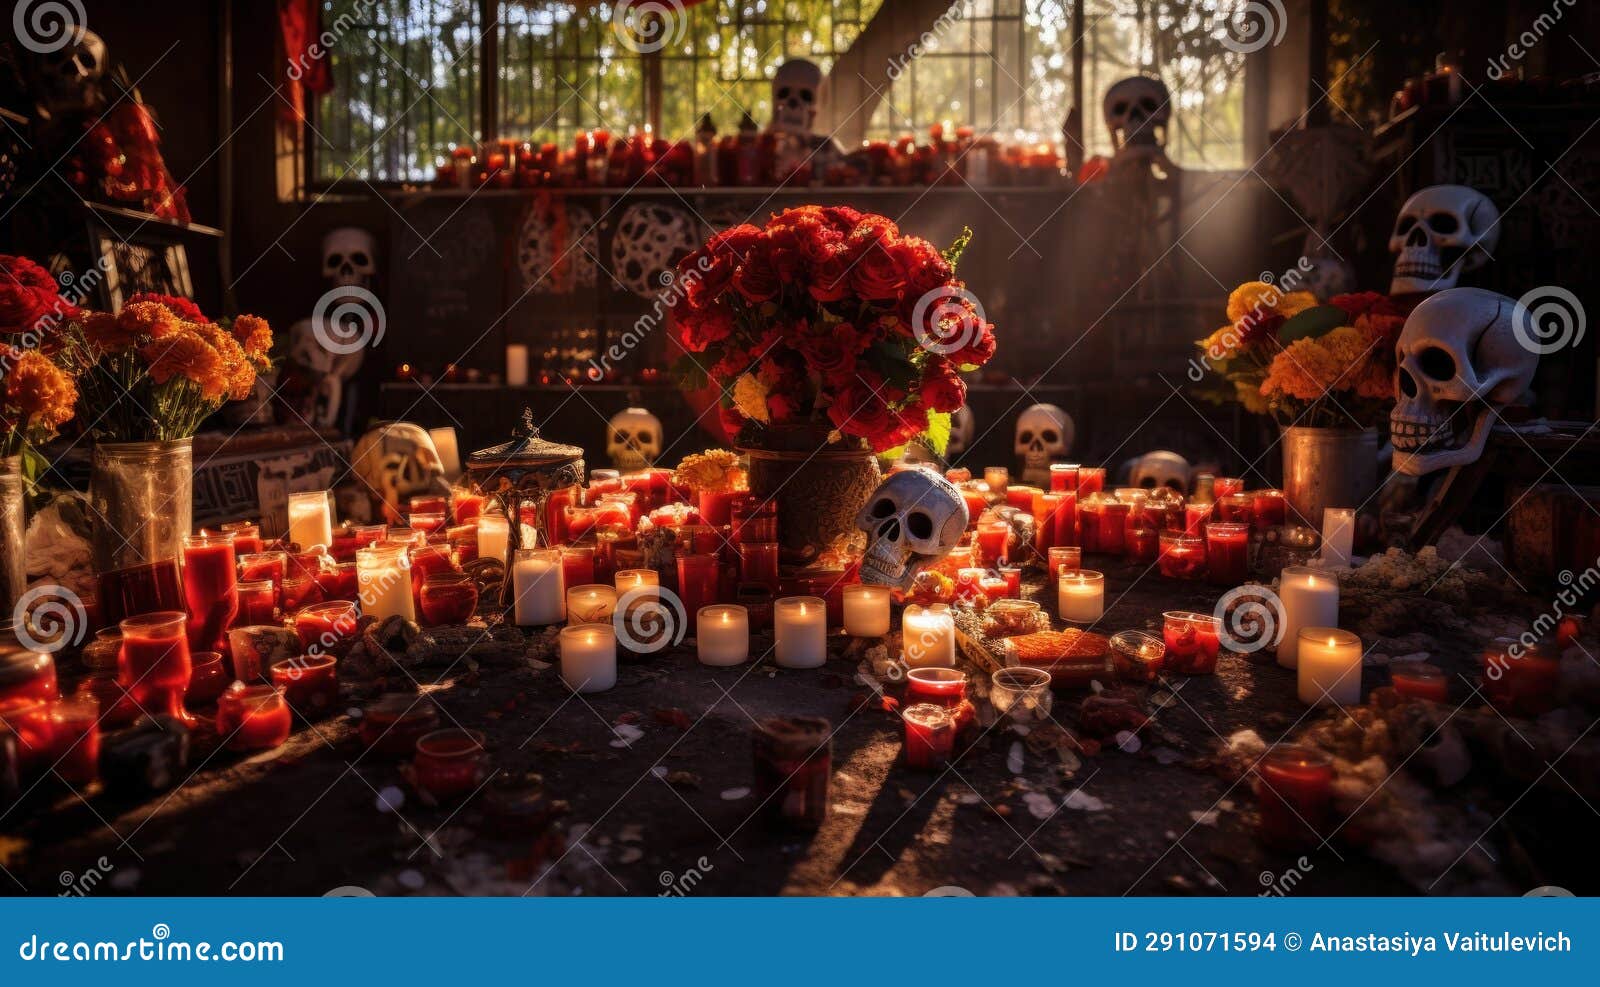 ofrendas decorated with candles and marigold flowers in the temple